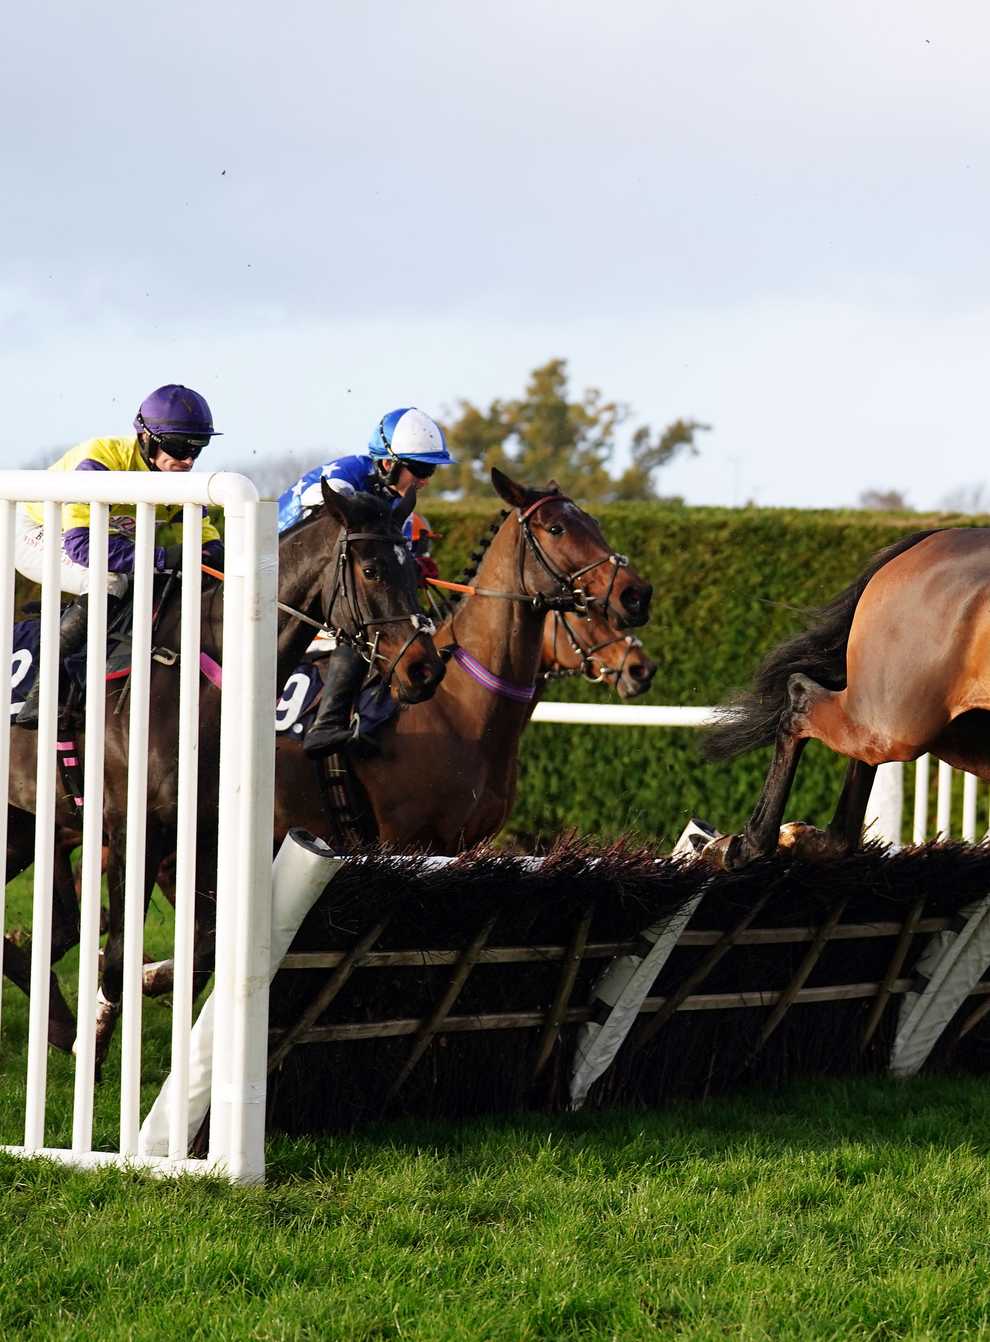 Beau Balko ridden by jockey Harry Cobden clear a fence on their way to winning the Hereford Motor Group Novices’ Hurdle at Hereford racecourse. Picture date: Wednesday November 23, 2022.